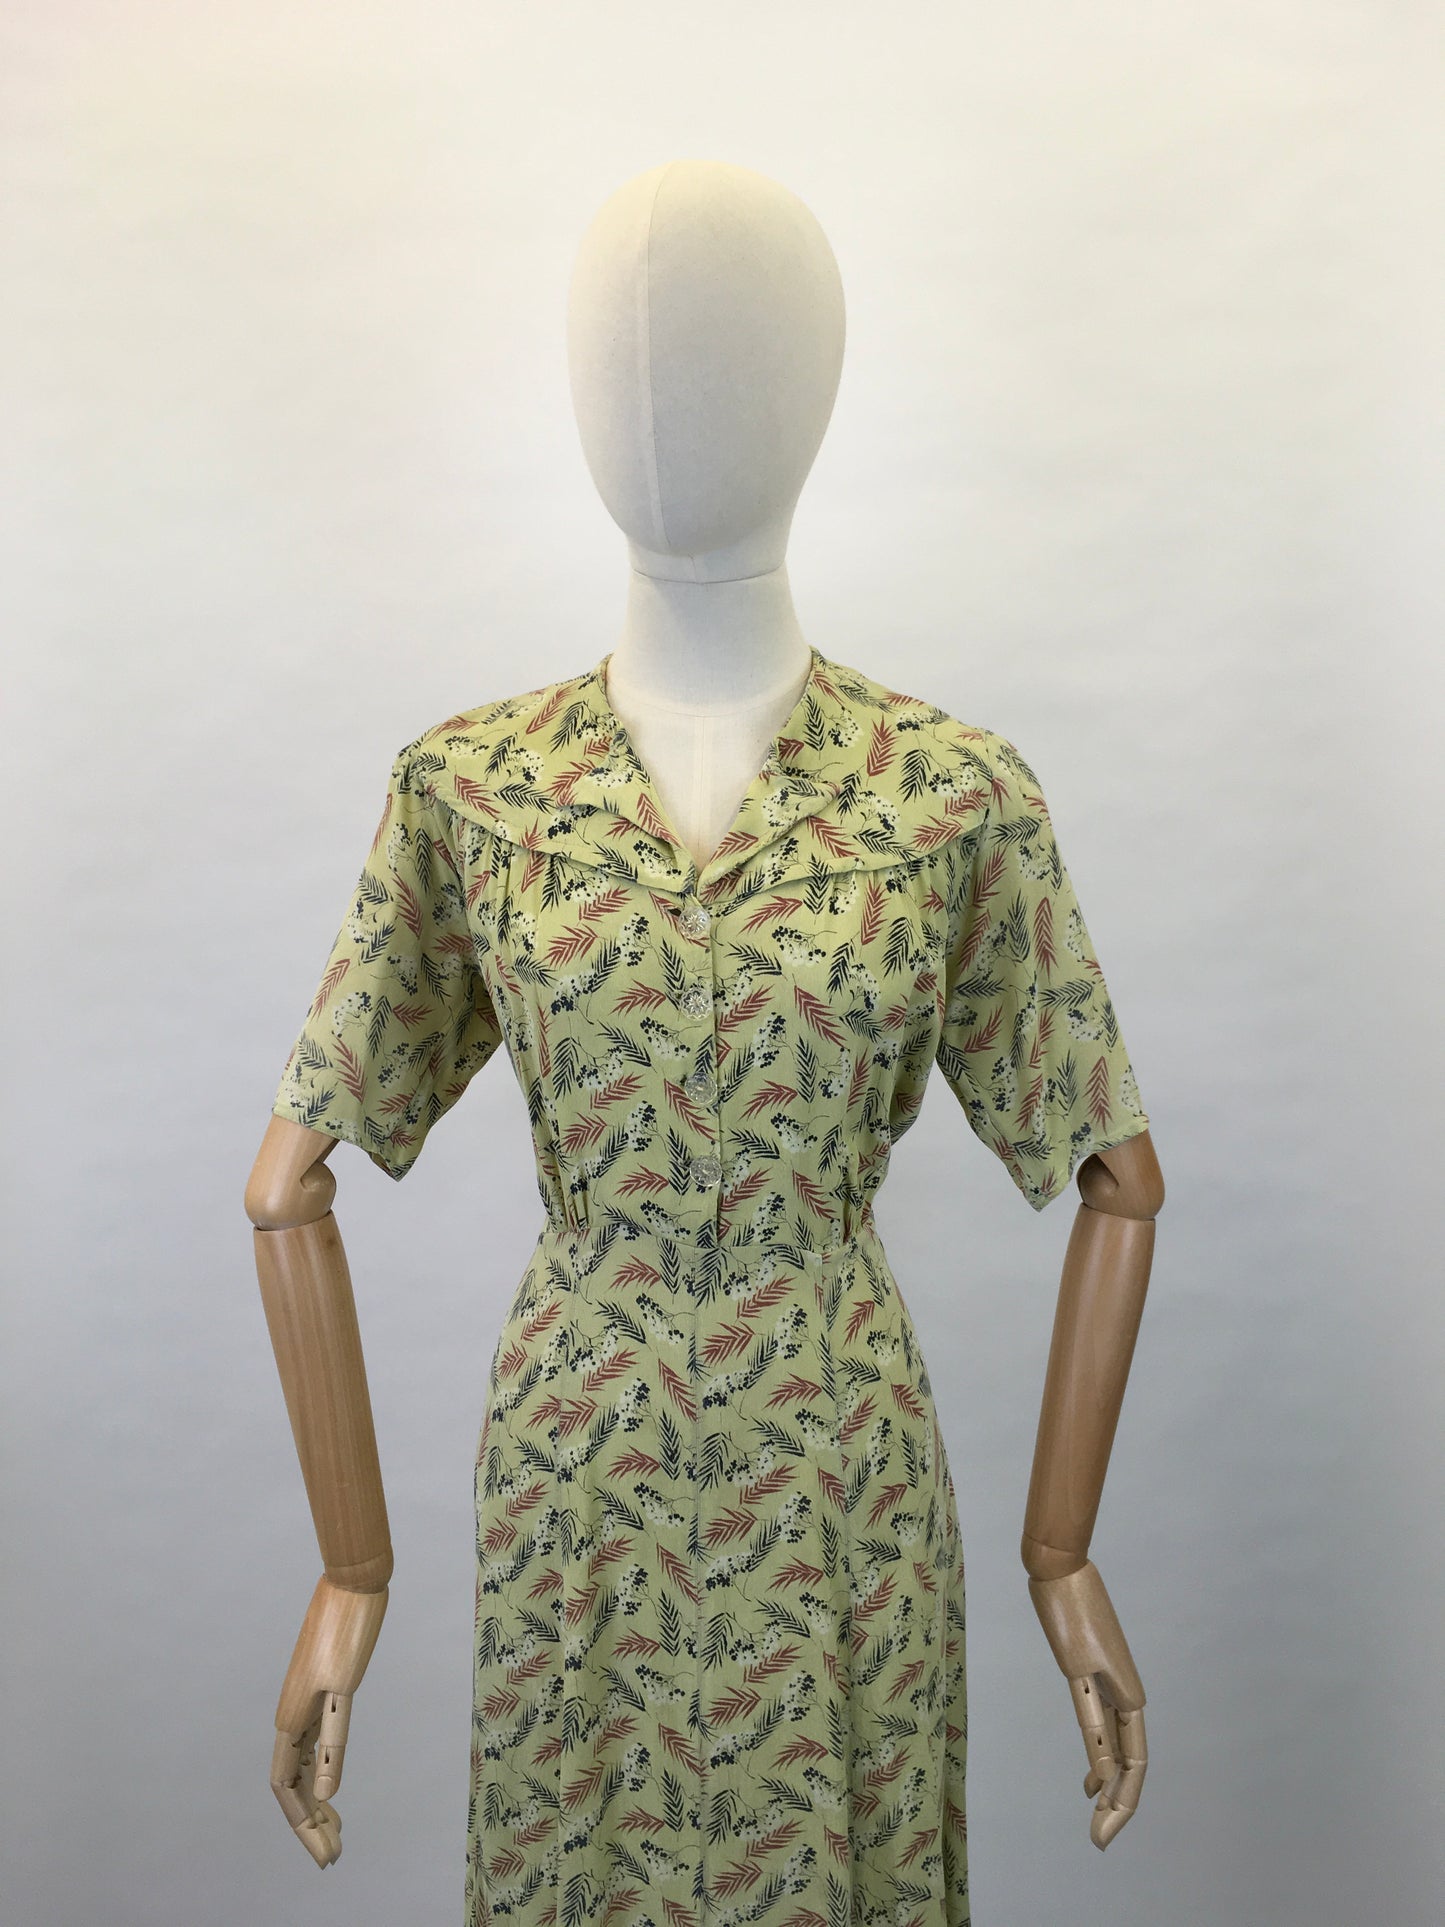 Original 1940s Day Dress - In a Lovely Chartreuse Crepe with Wheat / Leaf Print In Charcoal, Rust and White